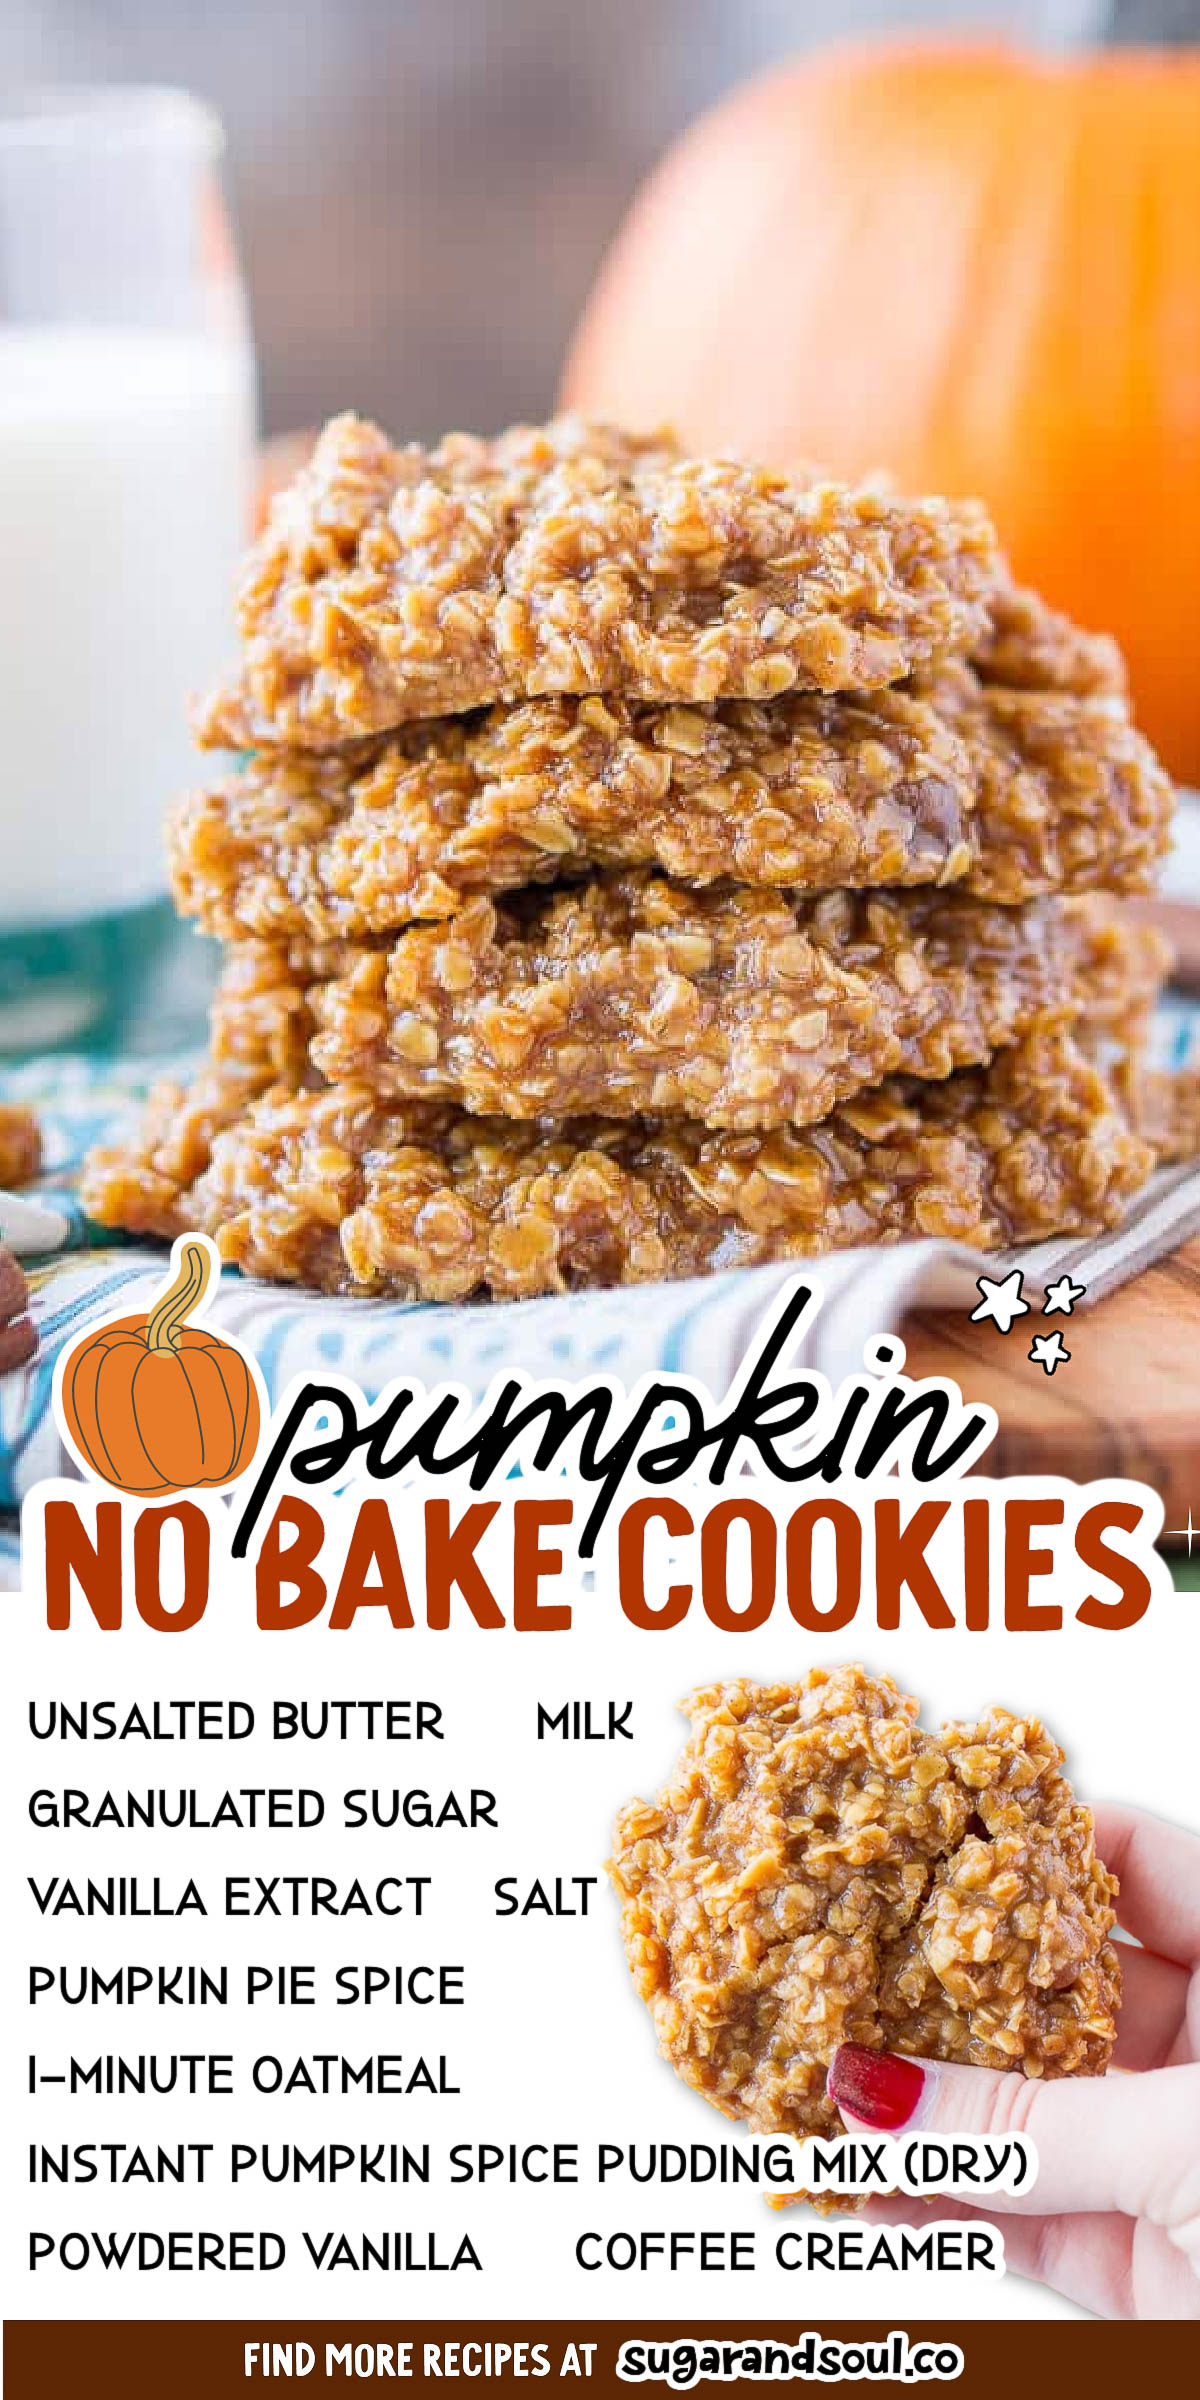 These Pumpkin No Bake Cookies are crazy delicious and so simple to make! Made with oatmeal, pumpkin spice pudding mix, sugar, butter, and more, these cookies will be a hit at home, the office, or a party!  via @sugarandsoulco